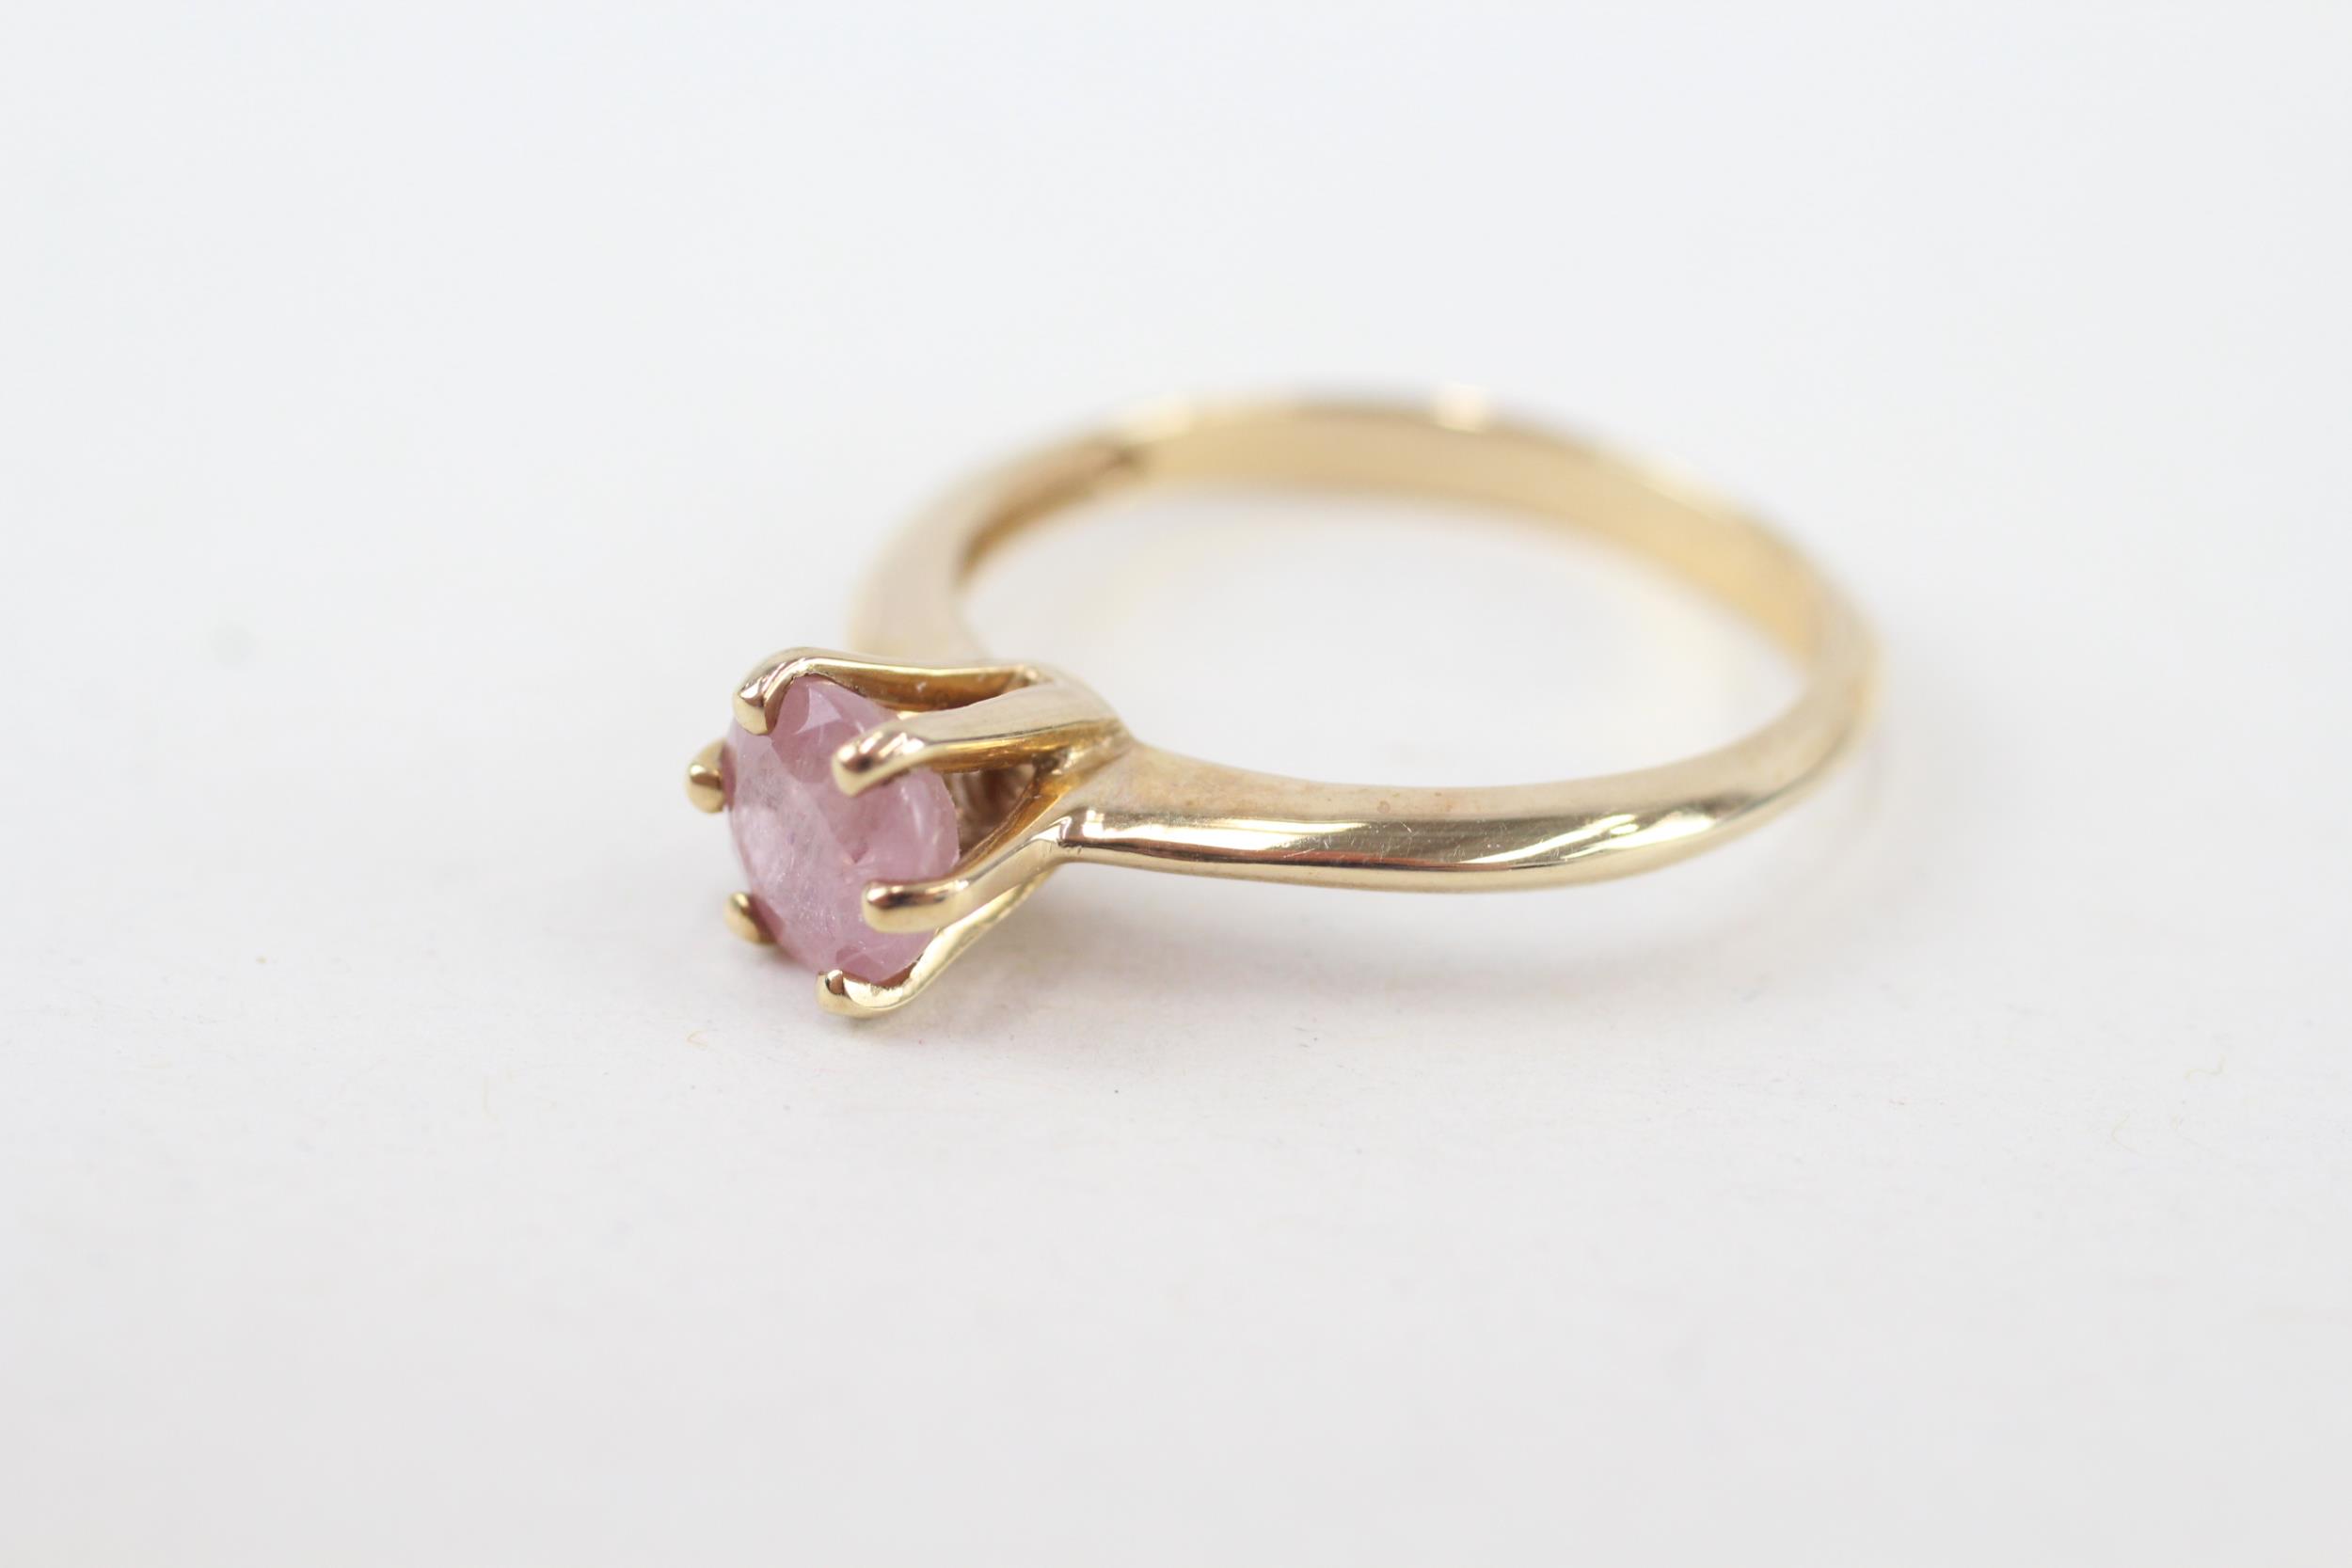 9ct gold pink gemstone solitaire ring (2.2g) Size N - Image 3 of 4